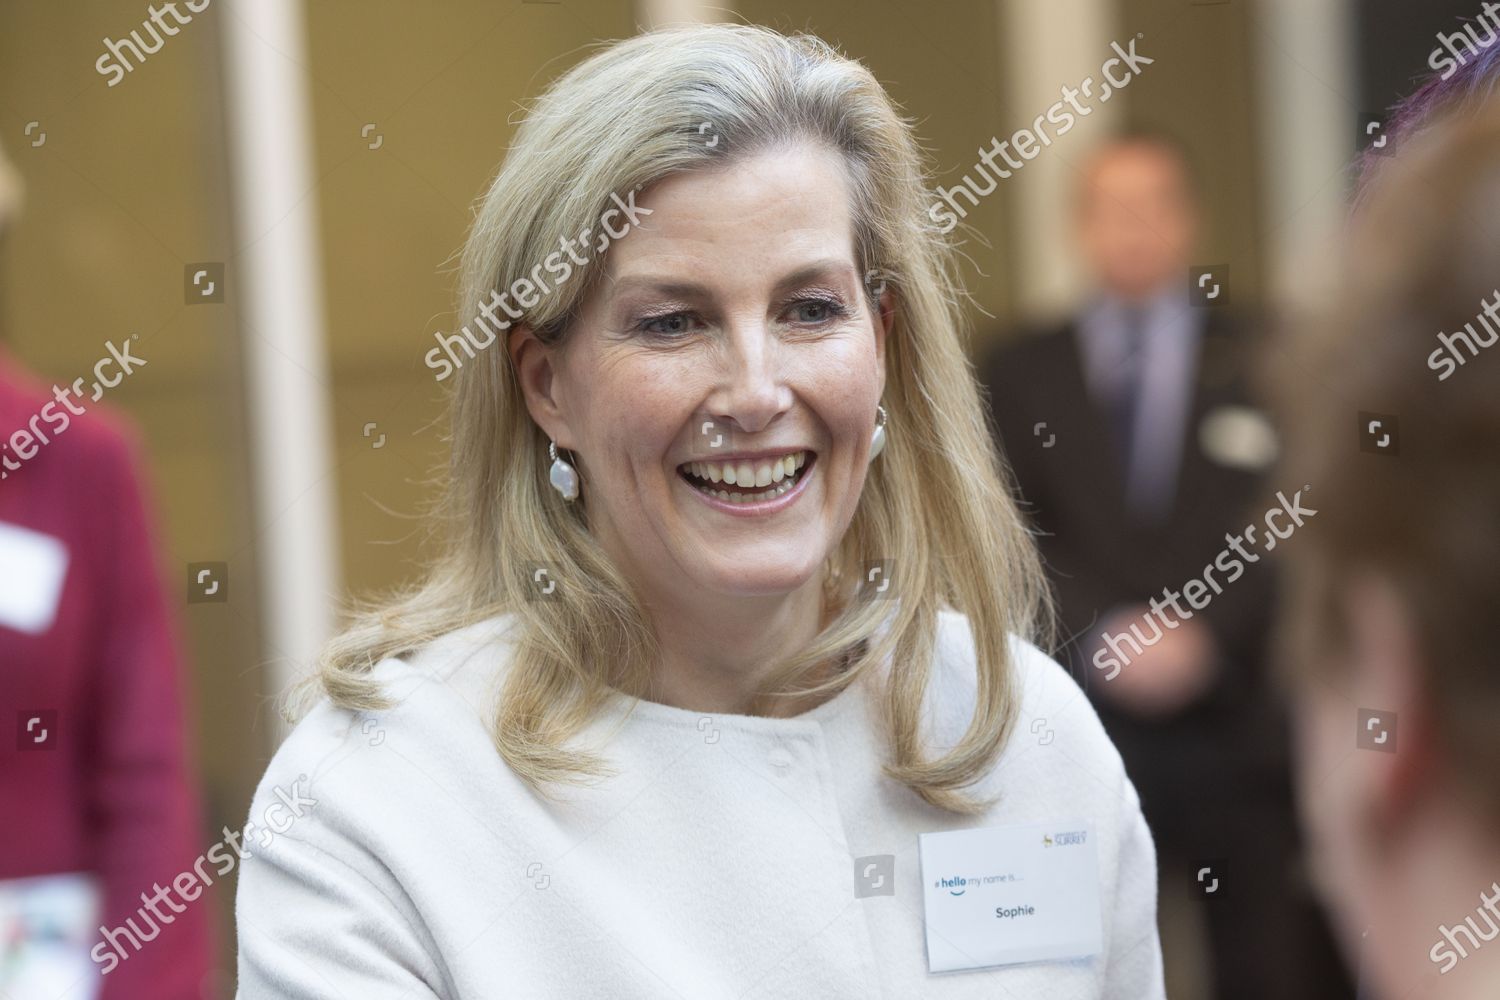 sophie-countess-of-wessex-opens-new-health-sciences-institute-university-of-surrey-guildford-uk-shutterstock-editorial-10542421an.jpg